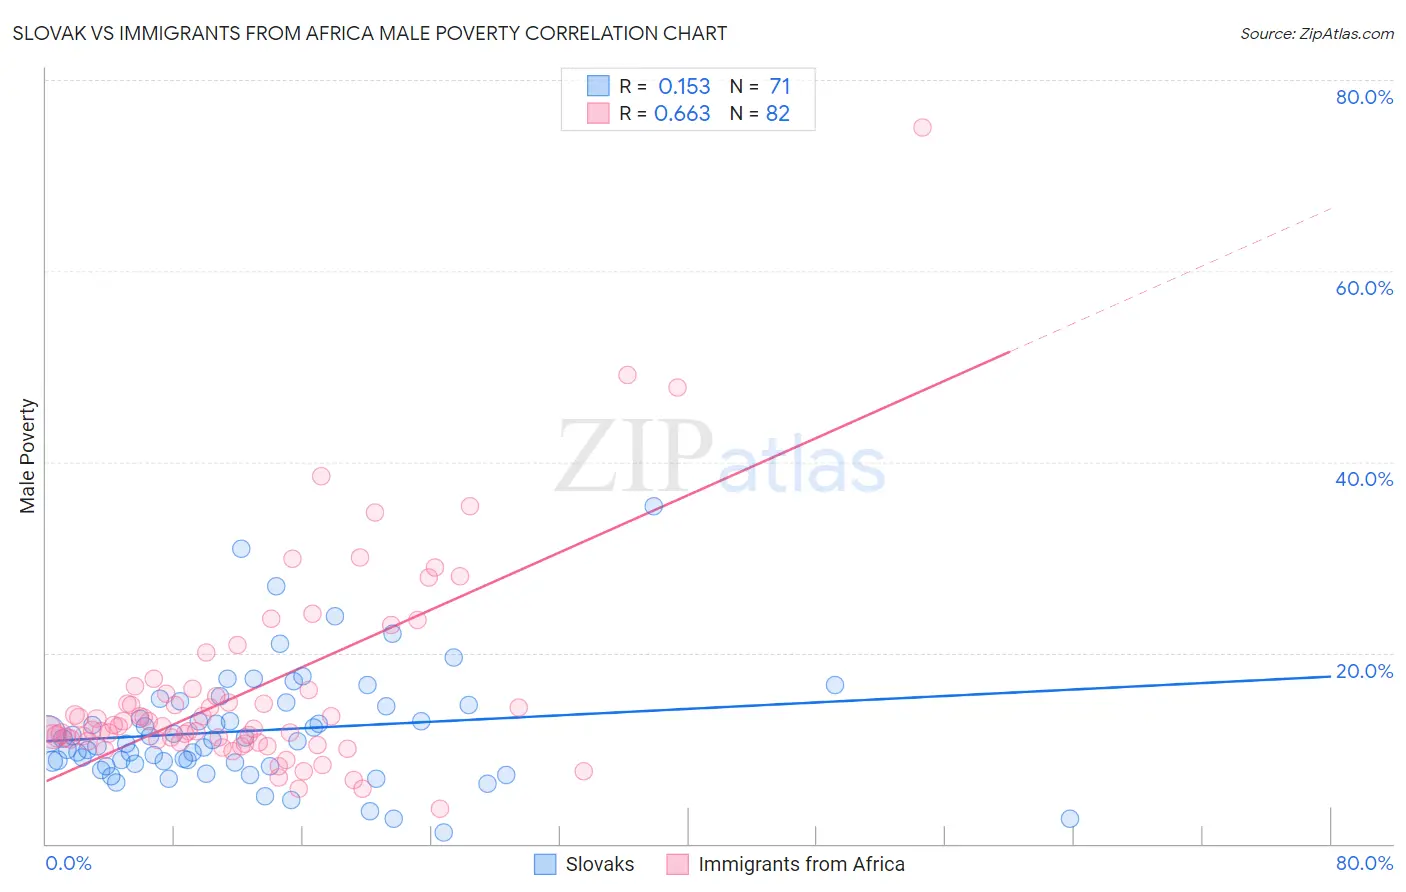 Slovak vs Immigrants from Africa Male Poverty